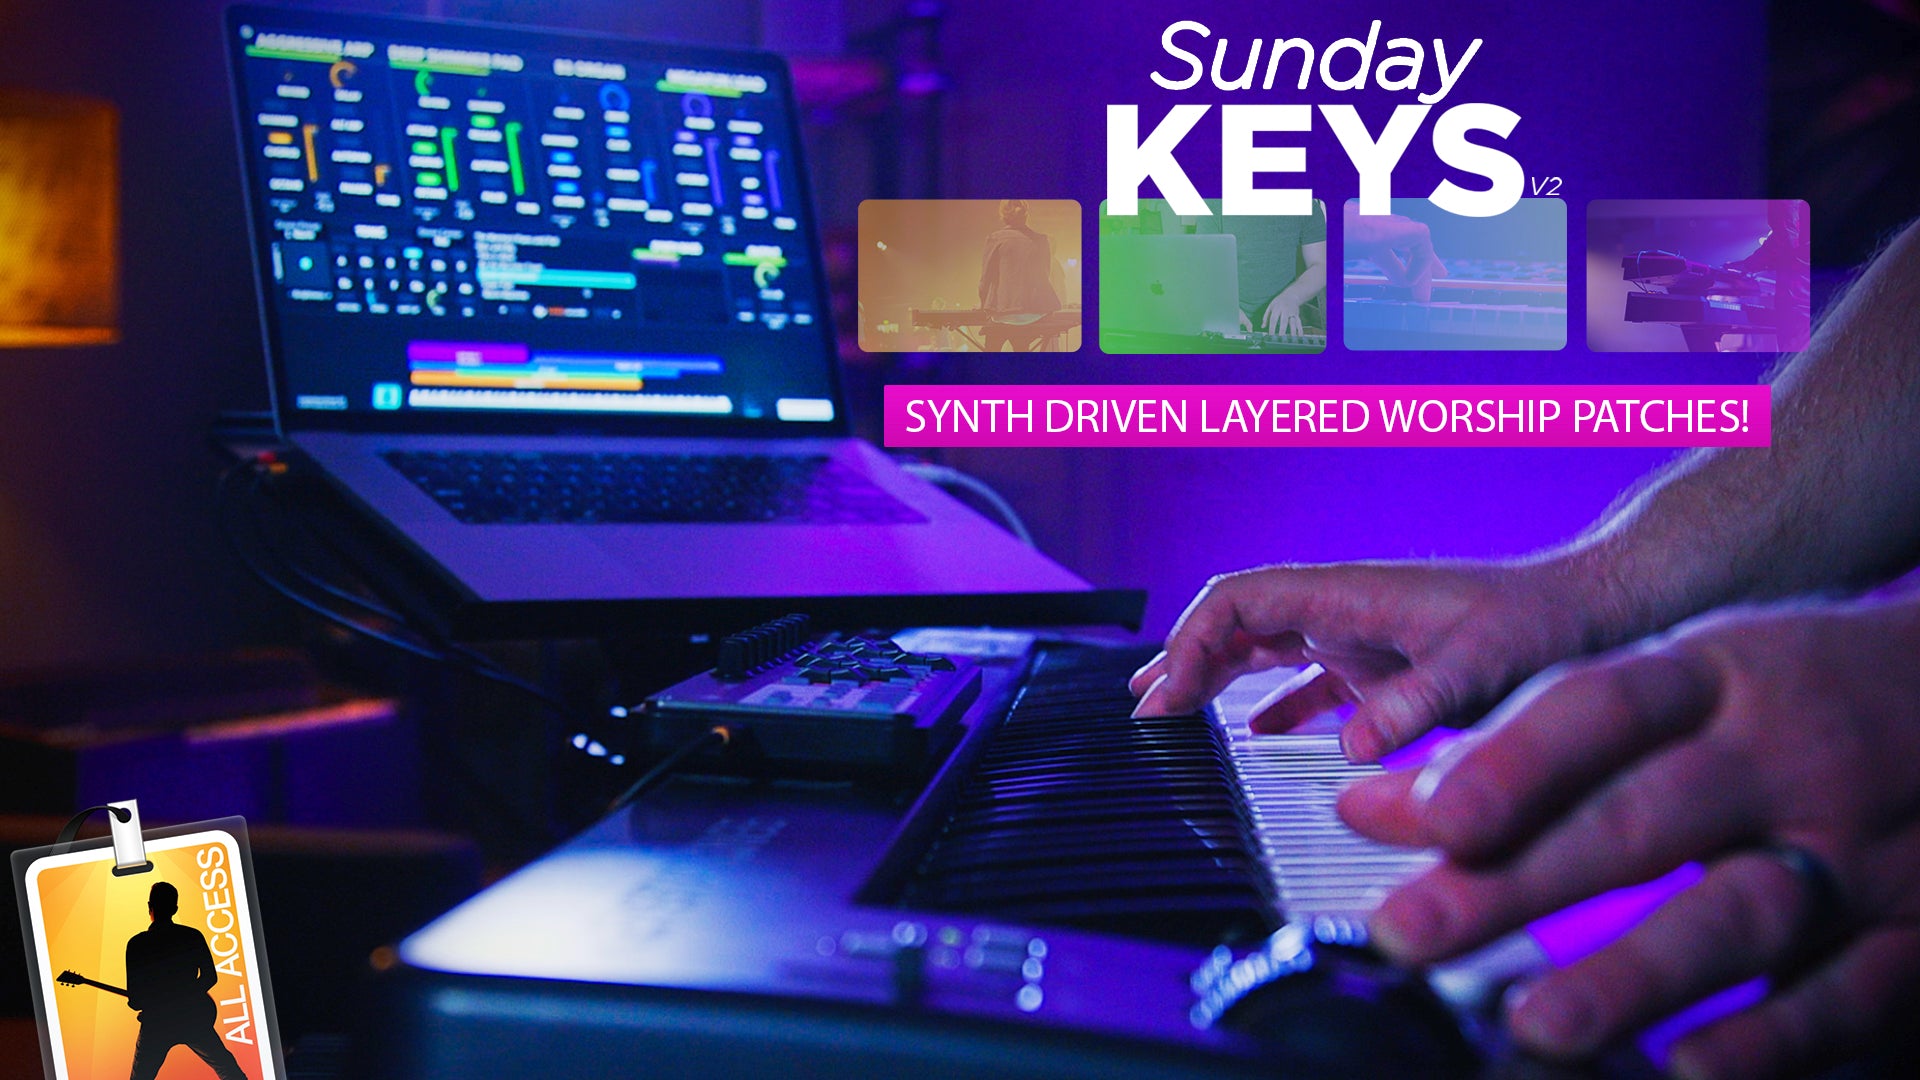 Synth Driven Layered Worship Patches Demo - Sunday Keys Version 2